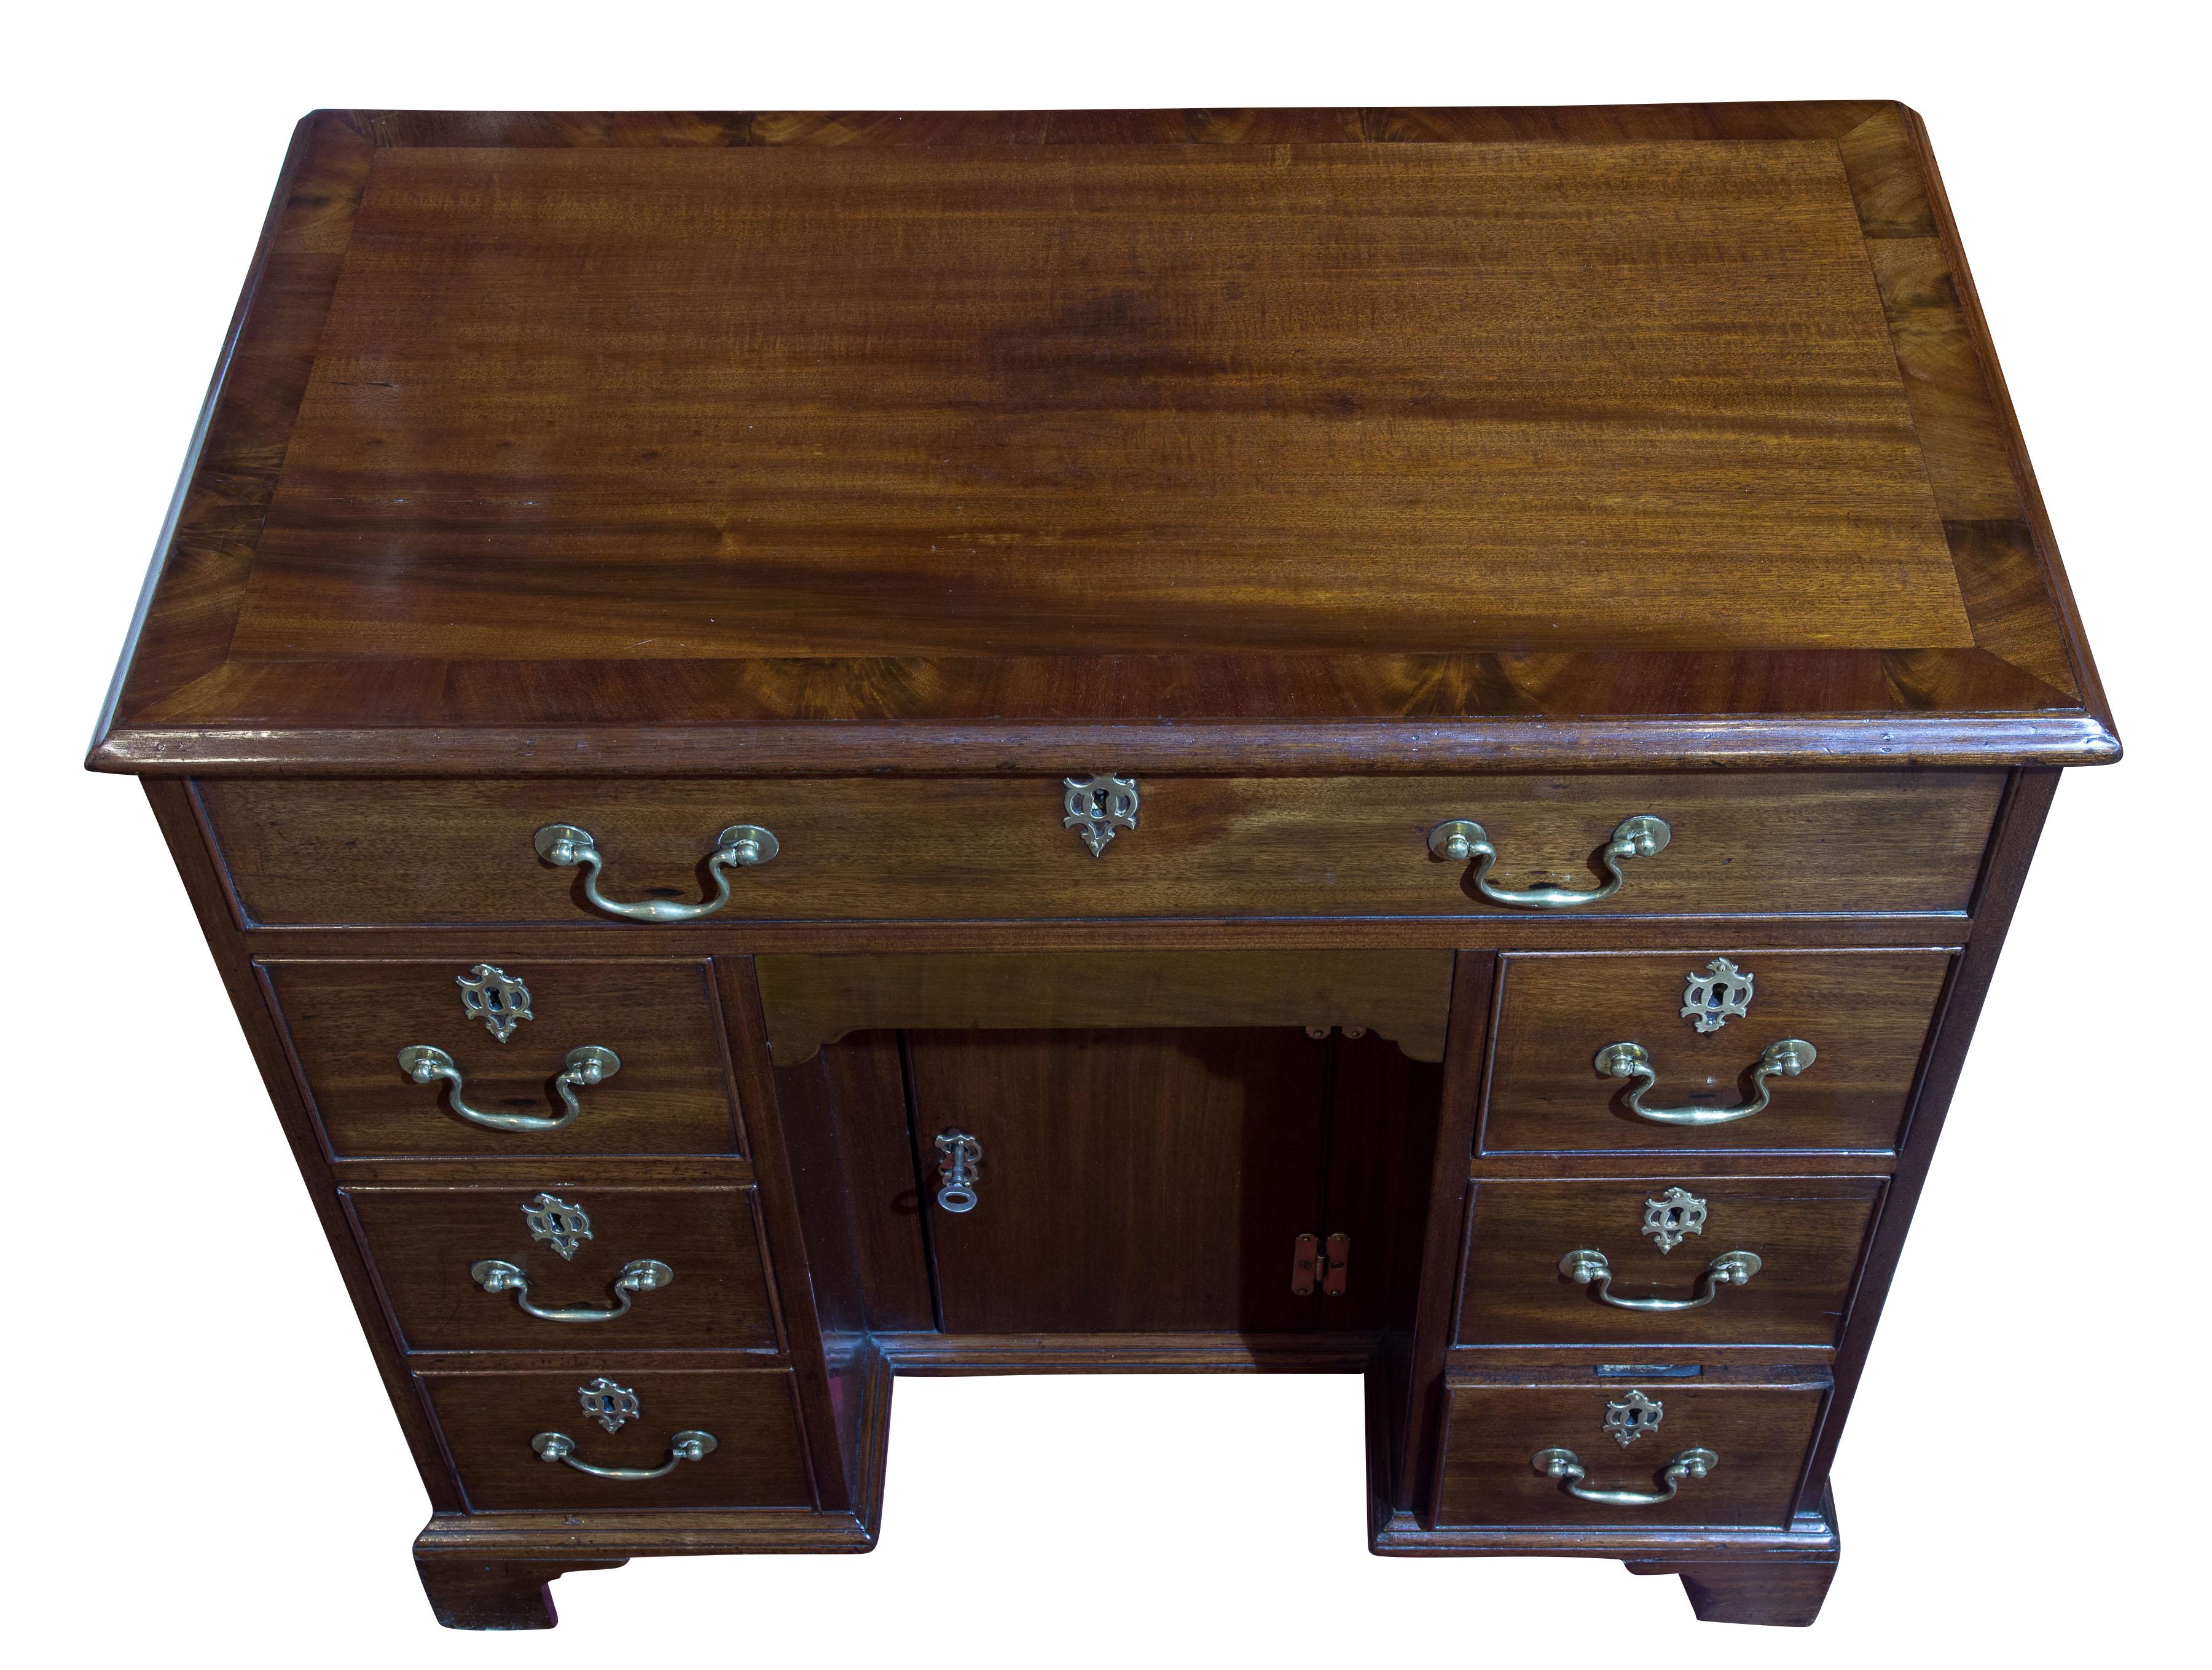 Striking George III Mahogany Kneehole Desk with Original Hardware In Good Condition For Sale In Salisbury, GB